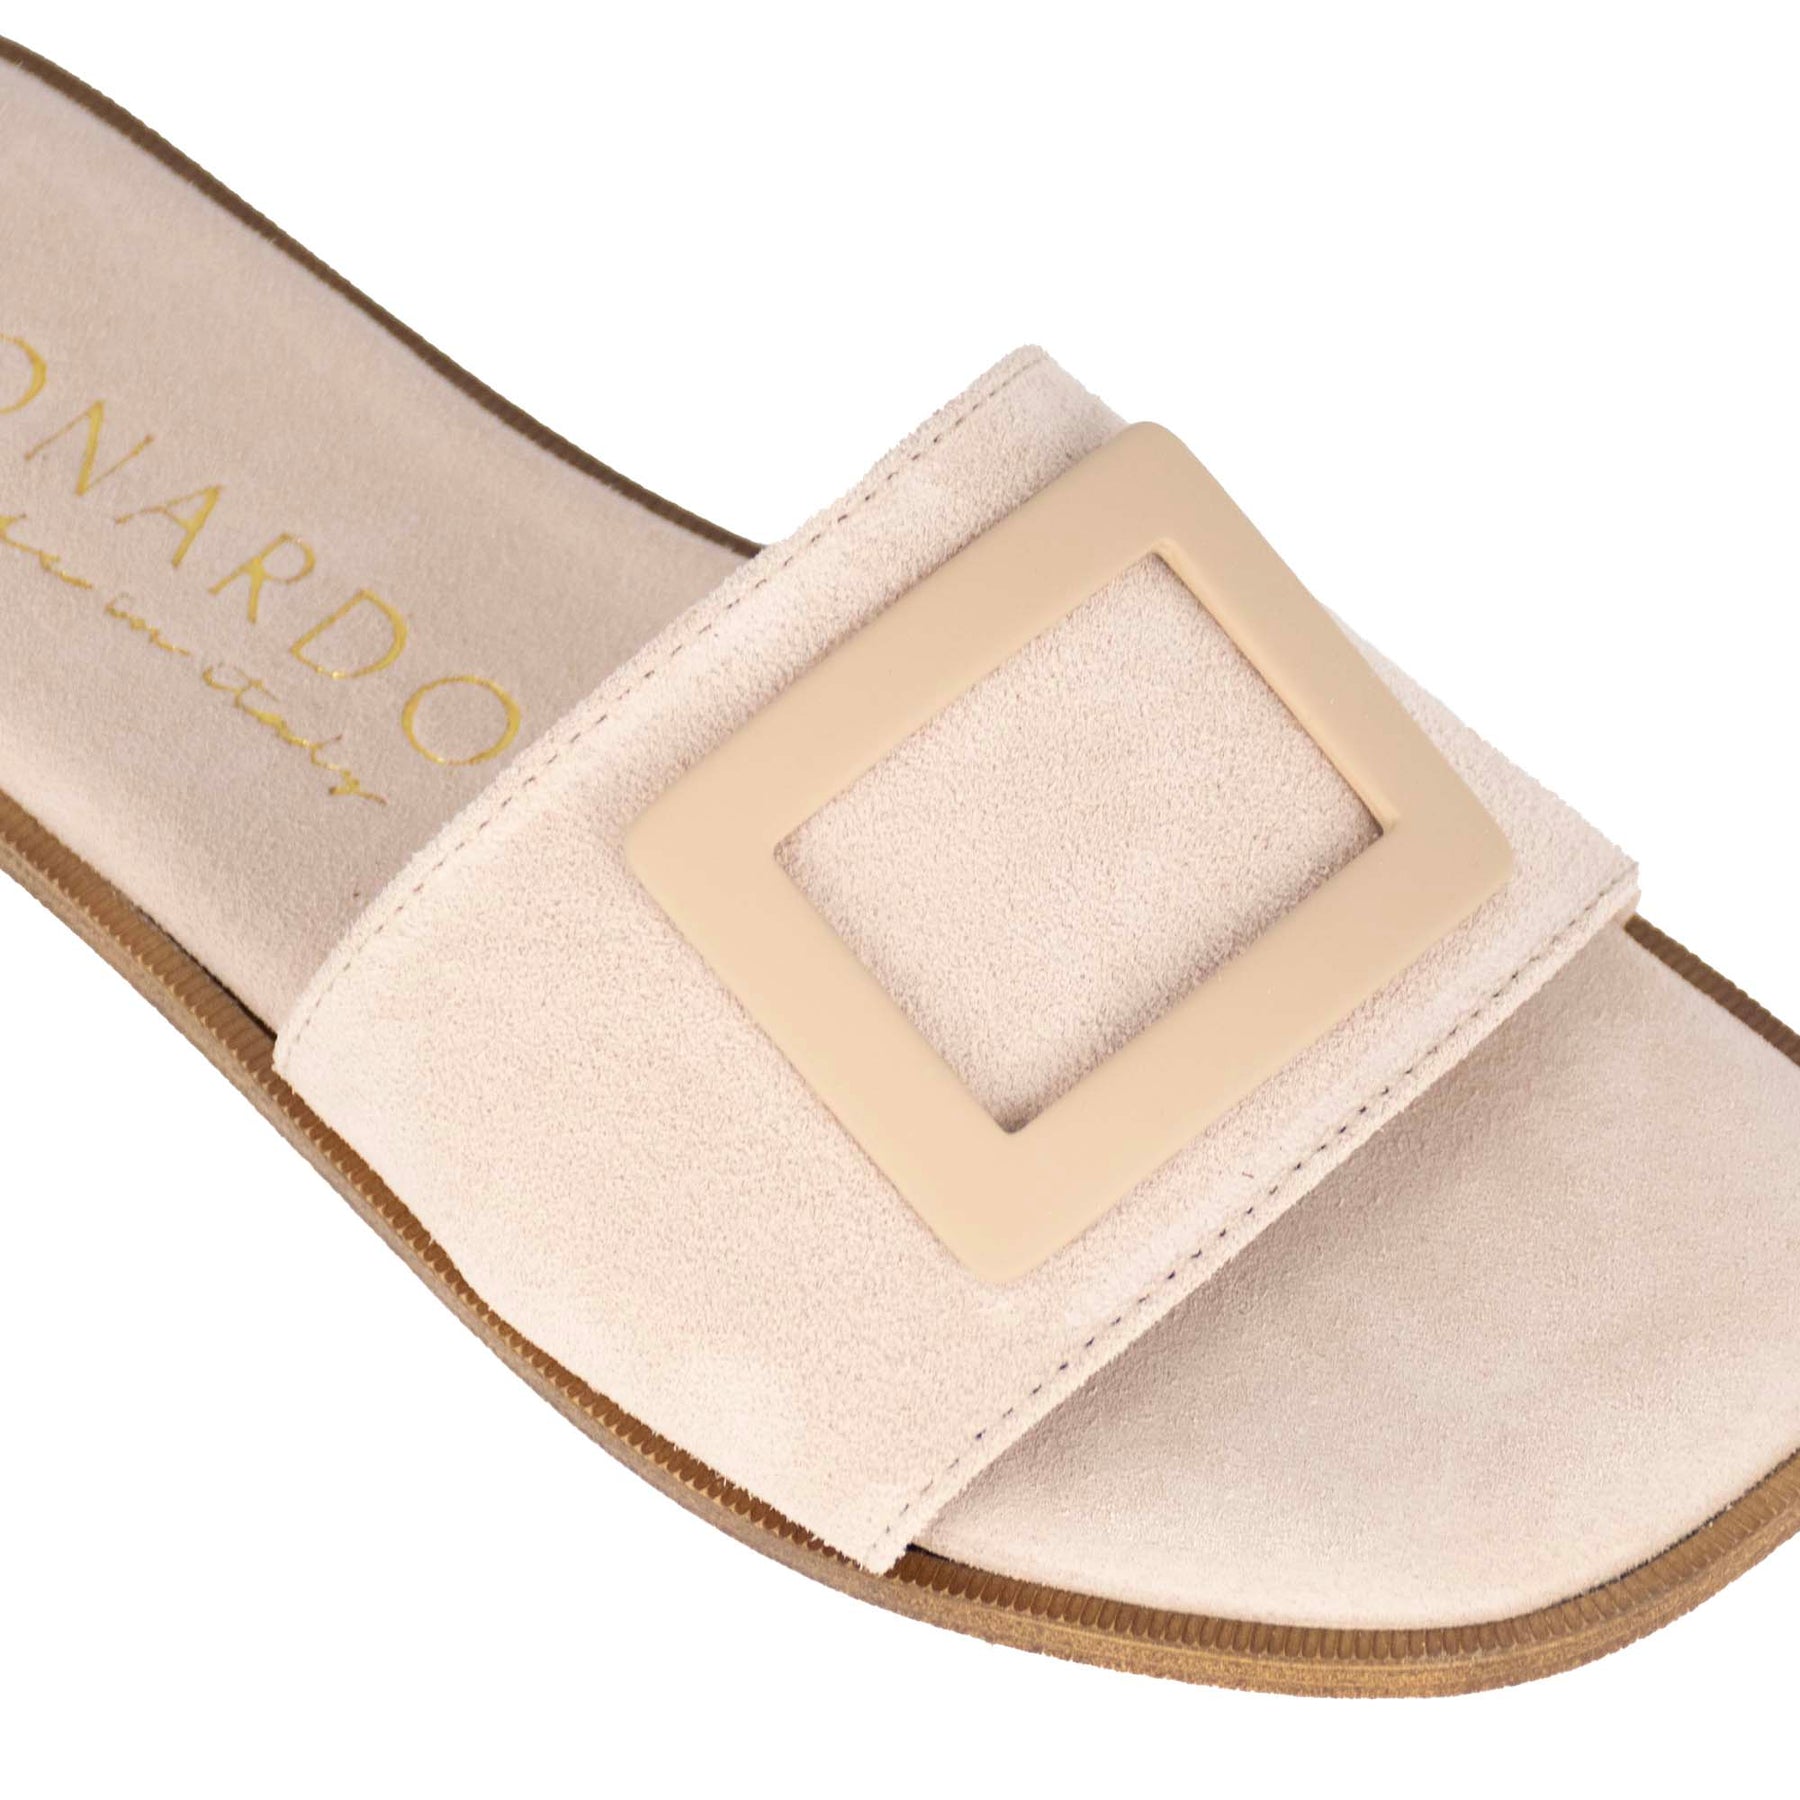 Women's suede slippers with beige strap